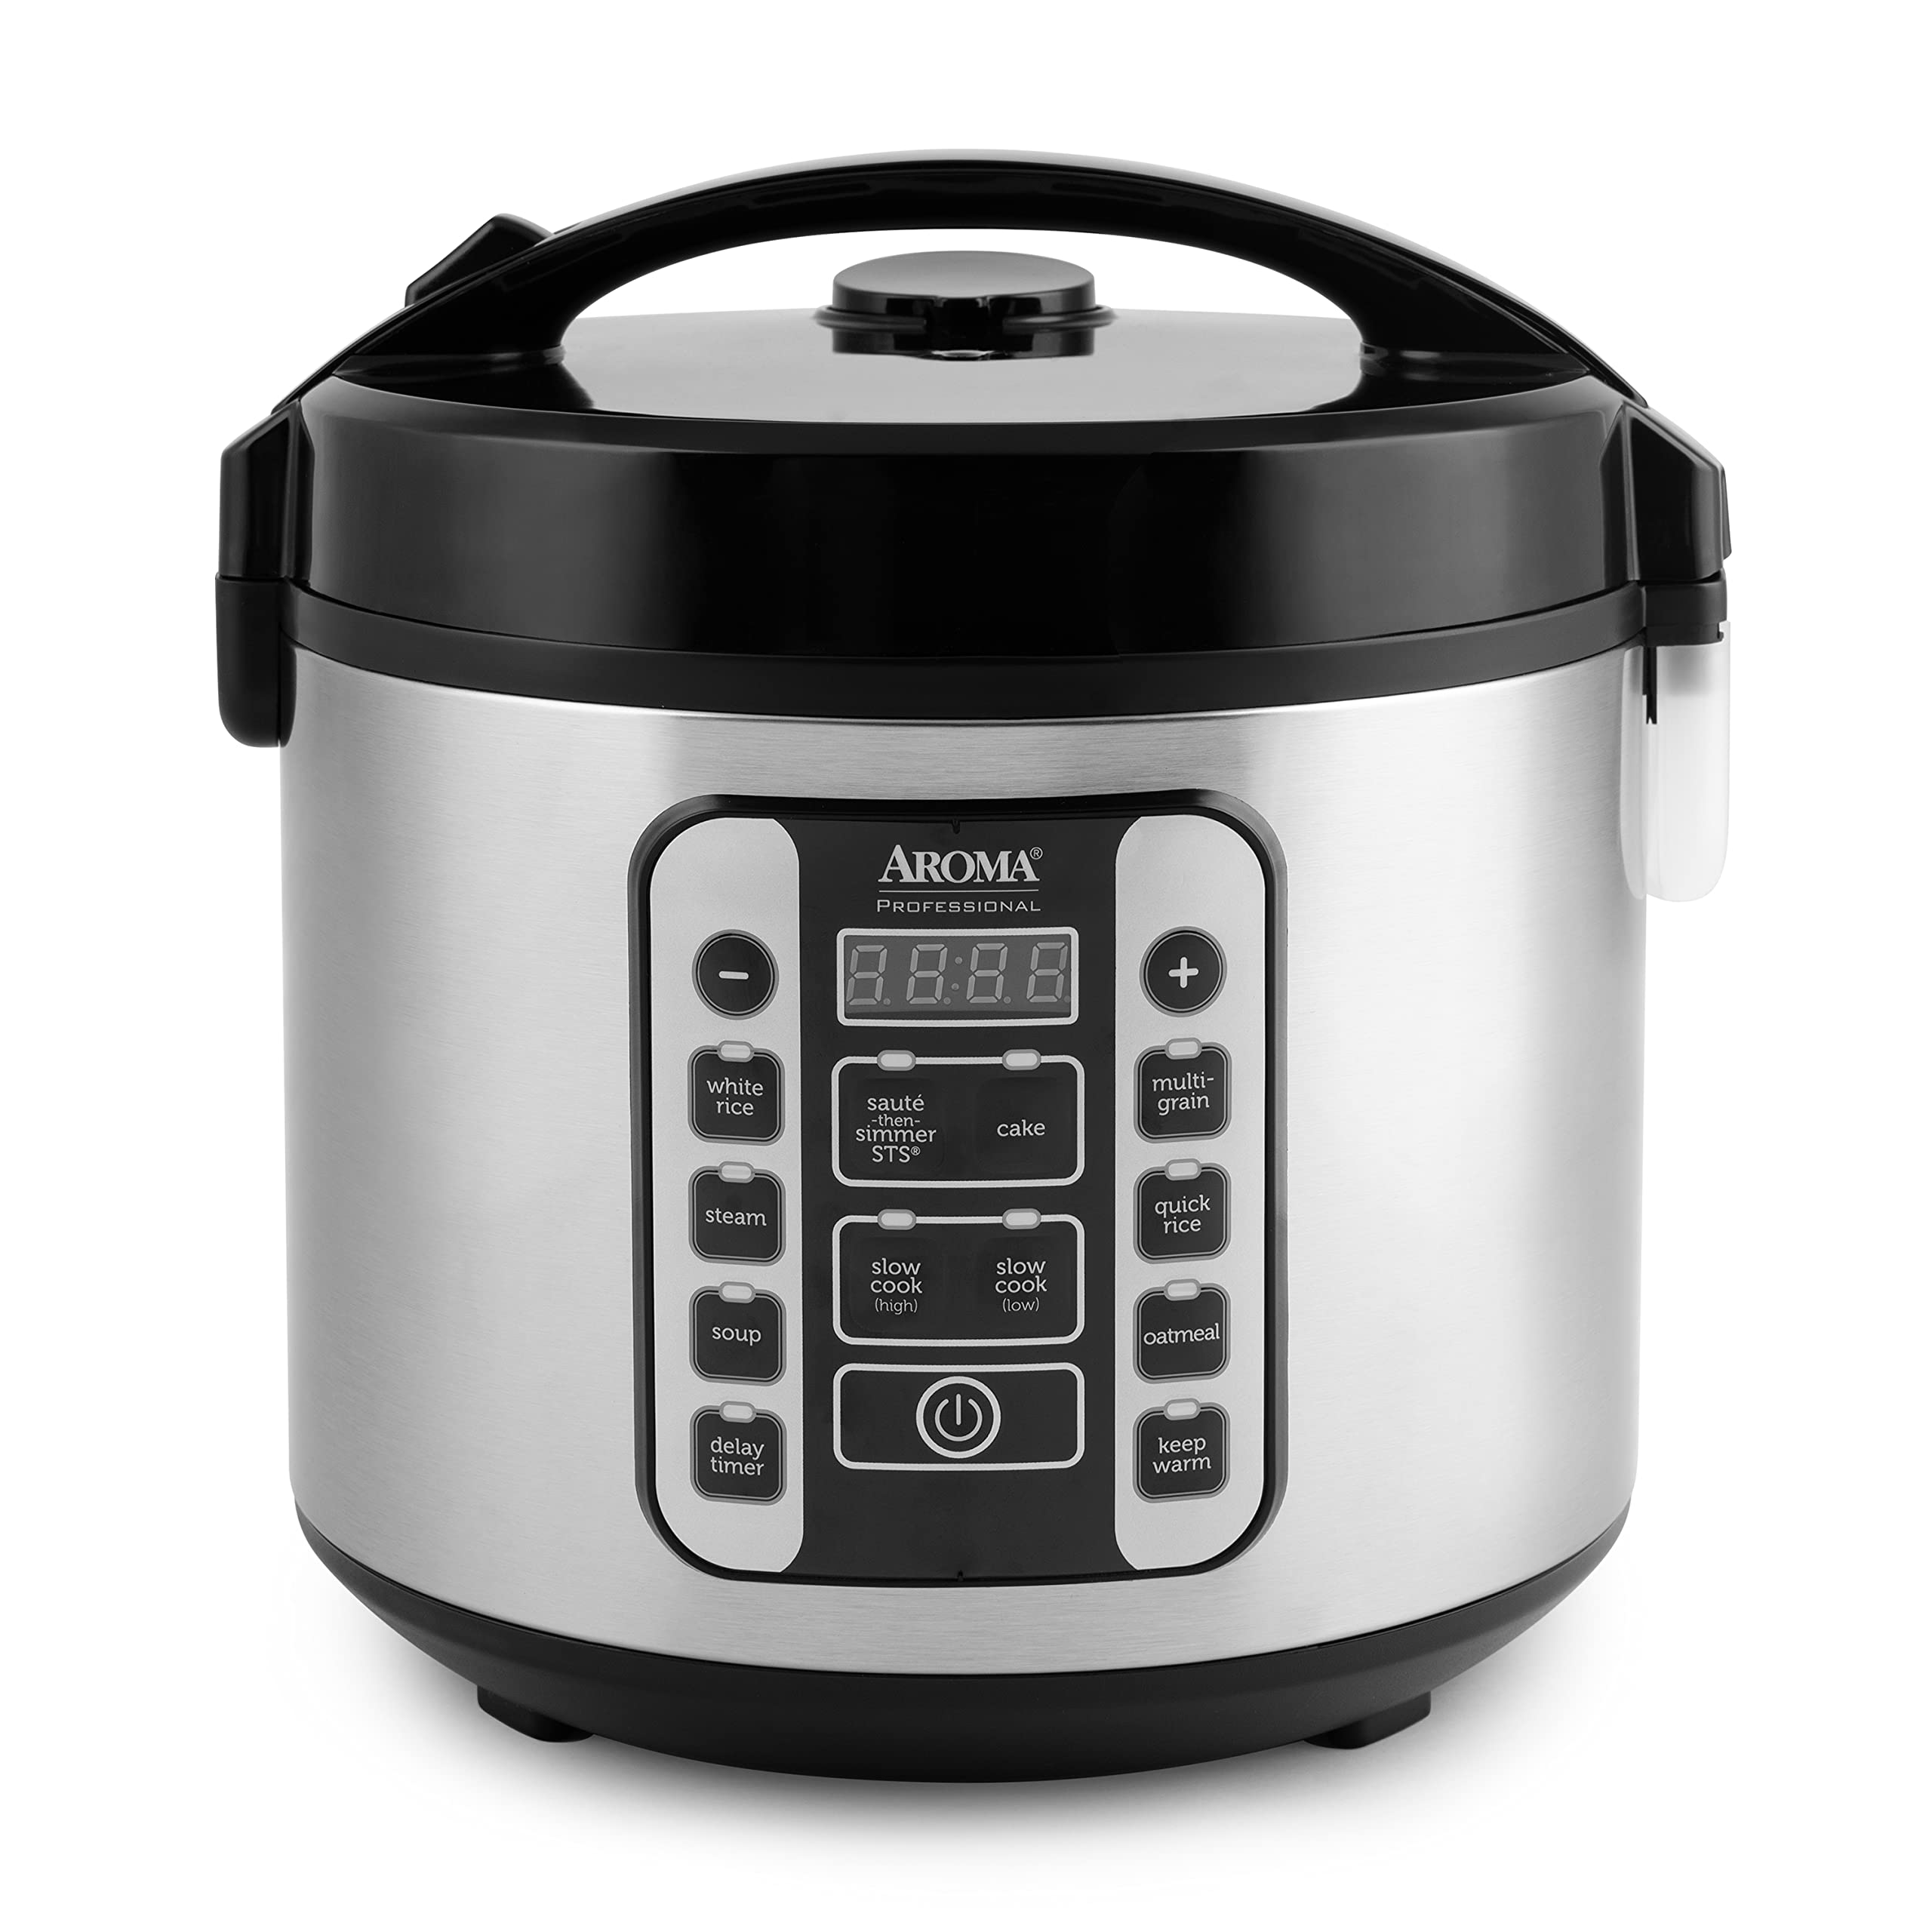 Looking to Buy the Perfect Rice Cooker This Year. Here are 10 Key Features of Cuckoo